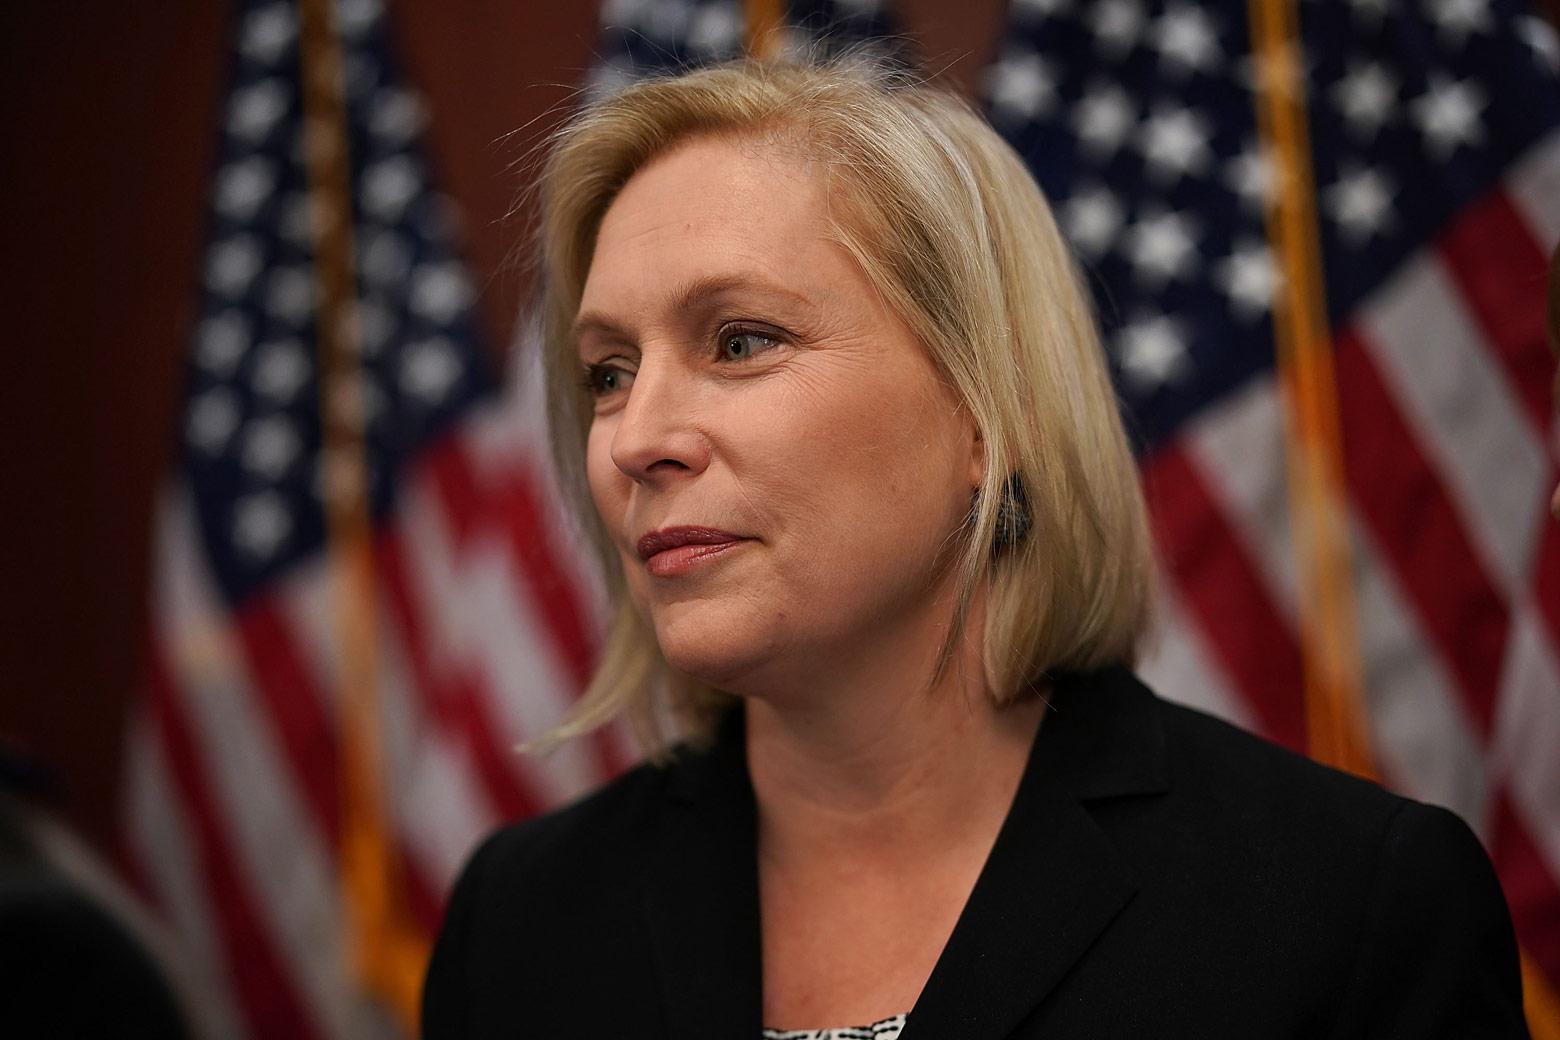 New York Sen. Kirsten Gillibrand listens during a Dec. 12 news conference on Capitol Hill in Washington.